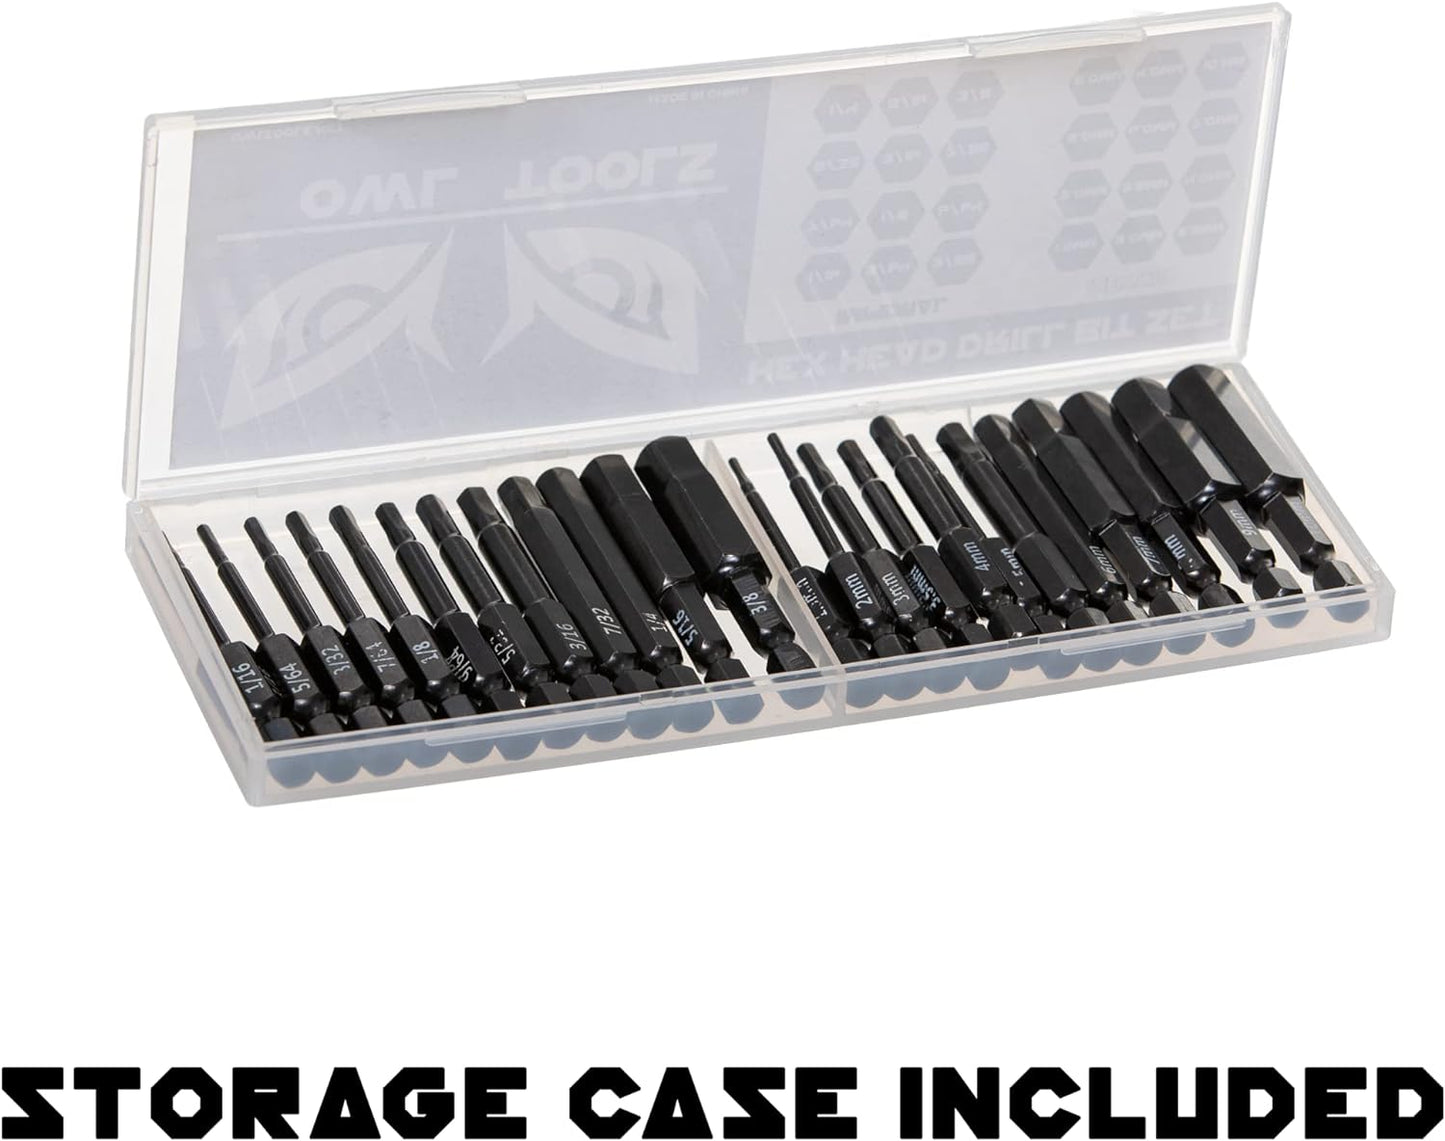 Owl Tools 24 Pack of Hex Head Allen Wrench Drill Bits (CR-MO Industrial Strength Metric & SAE Hex Bits) - 2.3" with Case